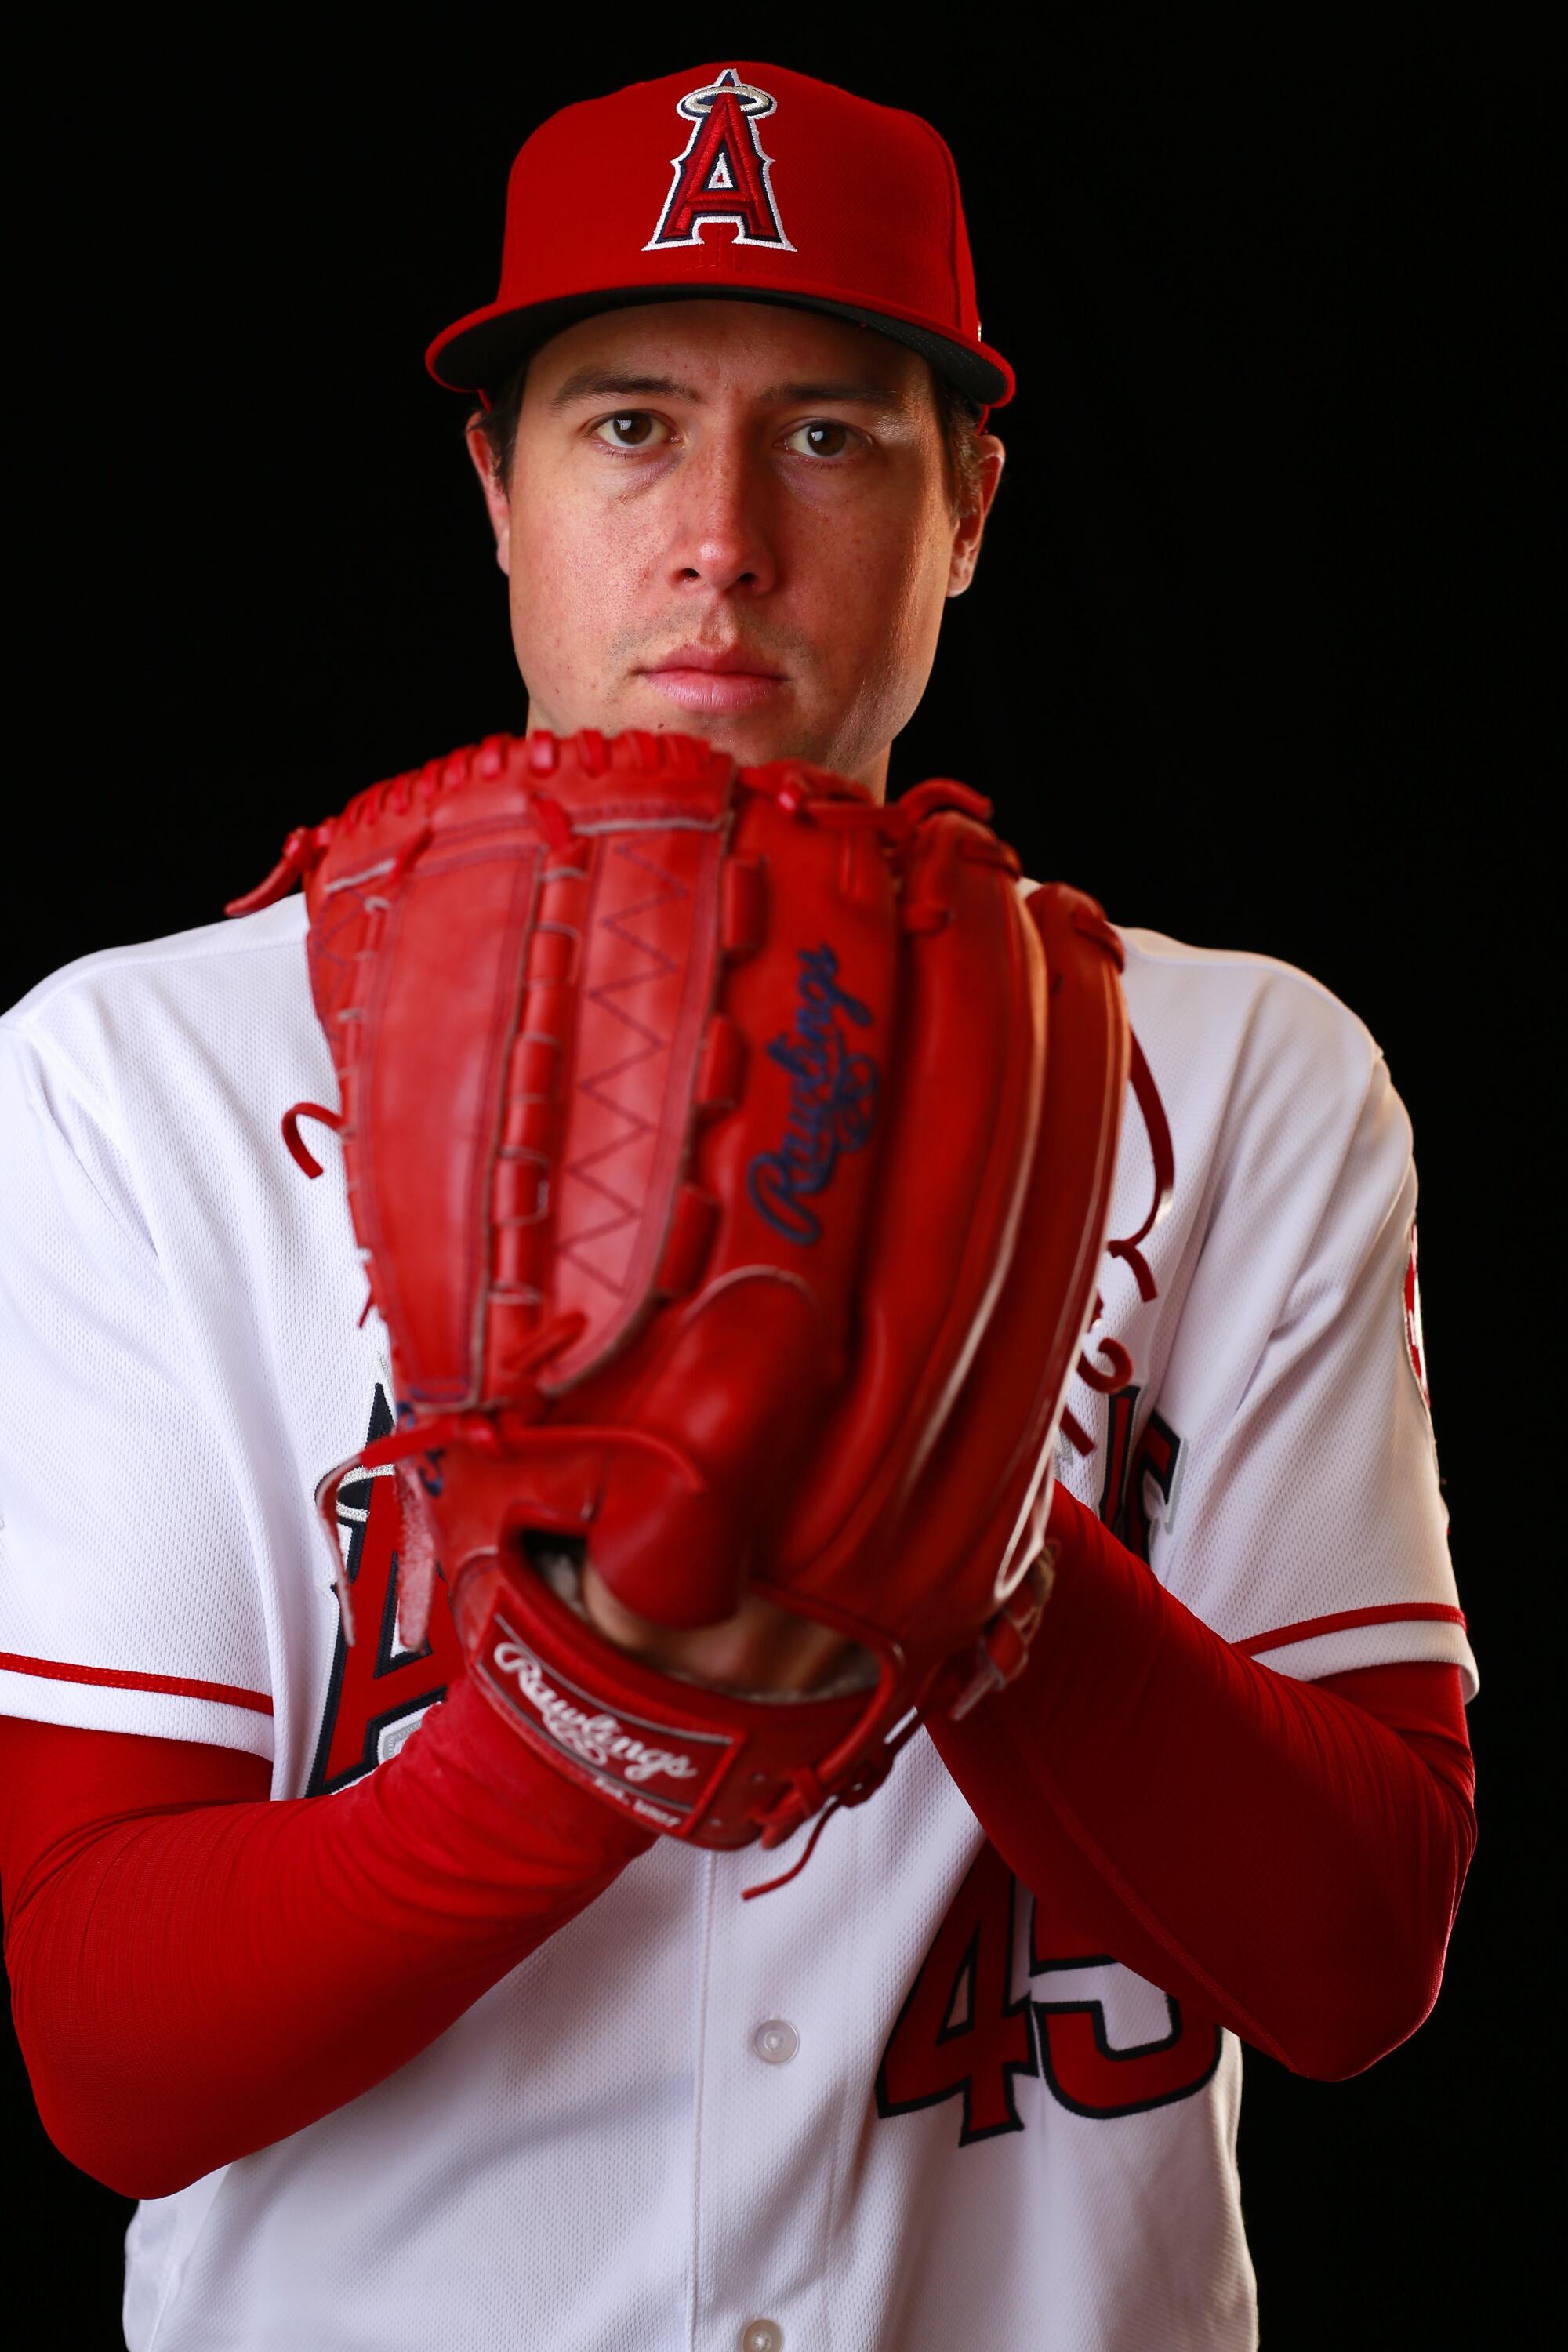 A portrait of Late Angels Tyler Skaggs posing with his left hand in a red Rawlings baseball glove and white uniform